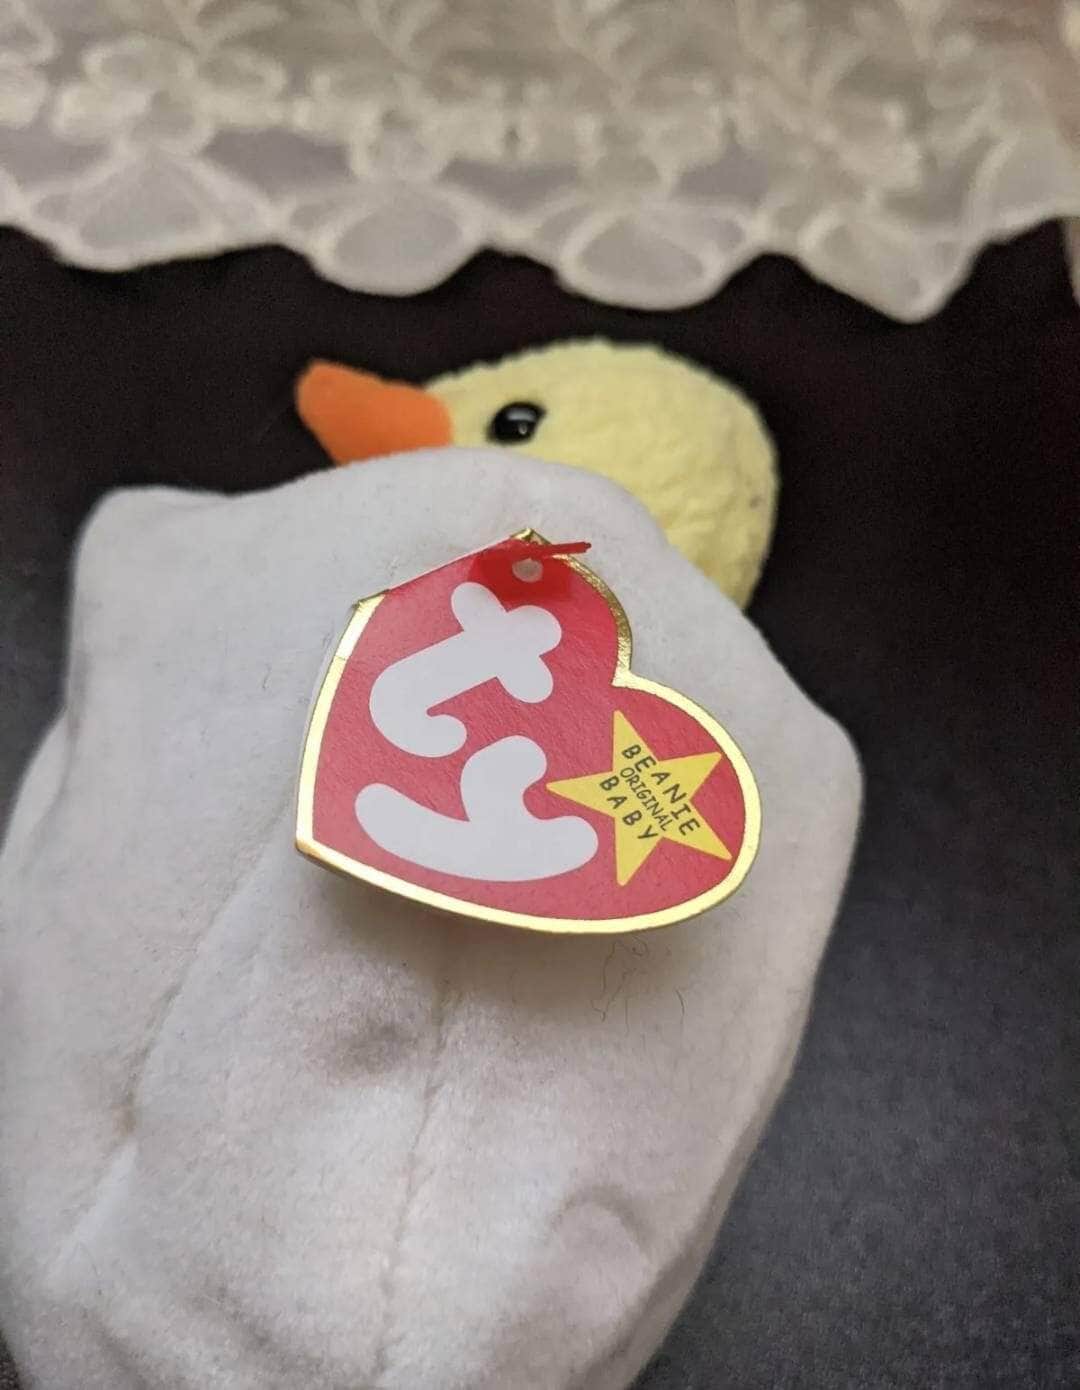 Ty Beanie Baby - Eggbert The Chick Hatching From Egg (5in) - Vintage Beanies Canada